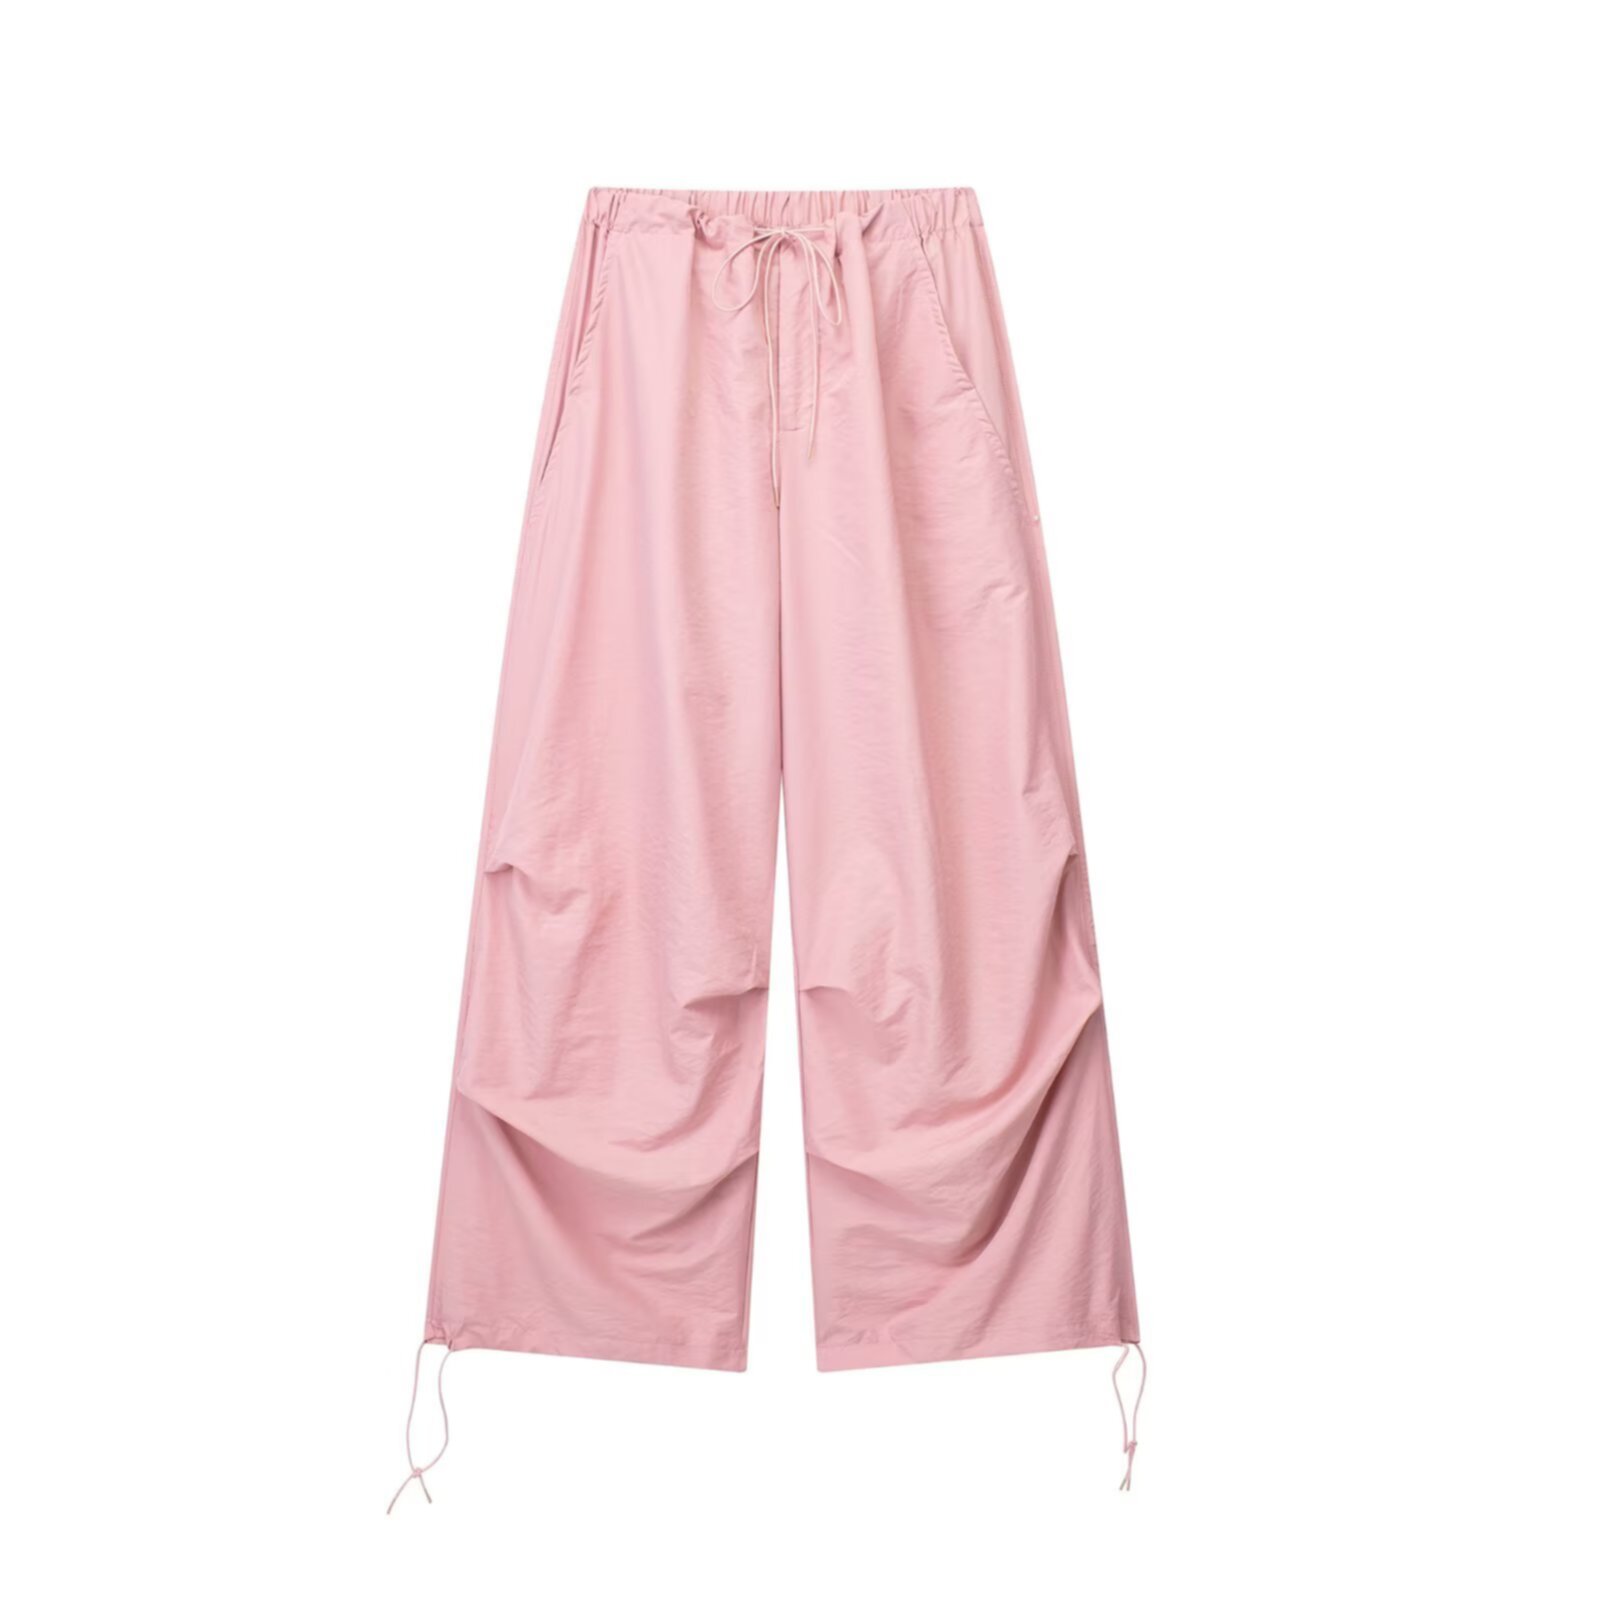 Casual loose fitting smooth soft sports pants